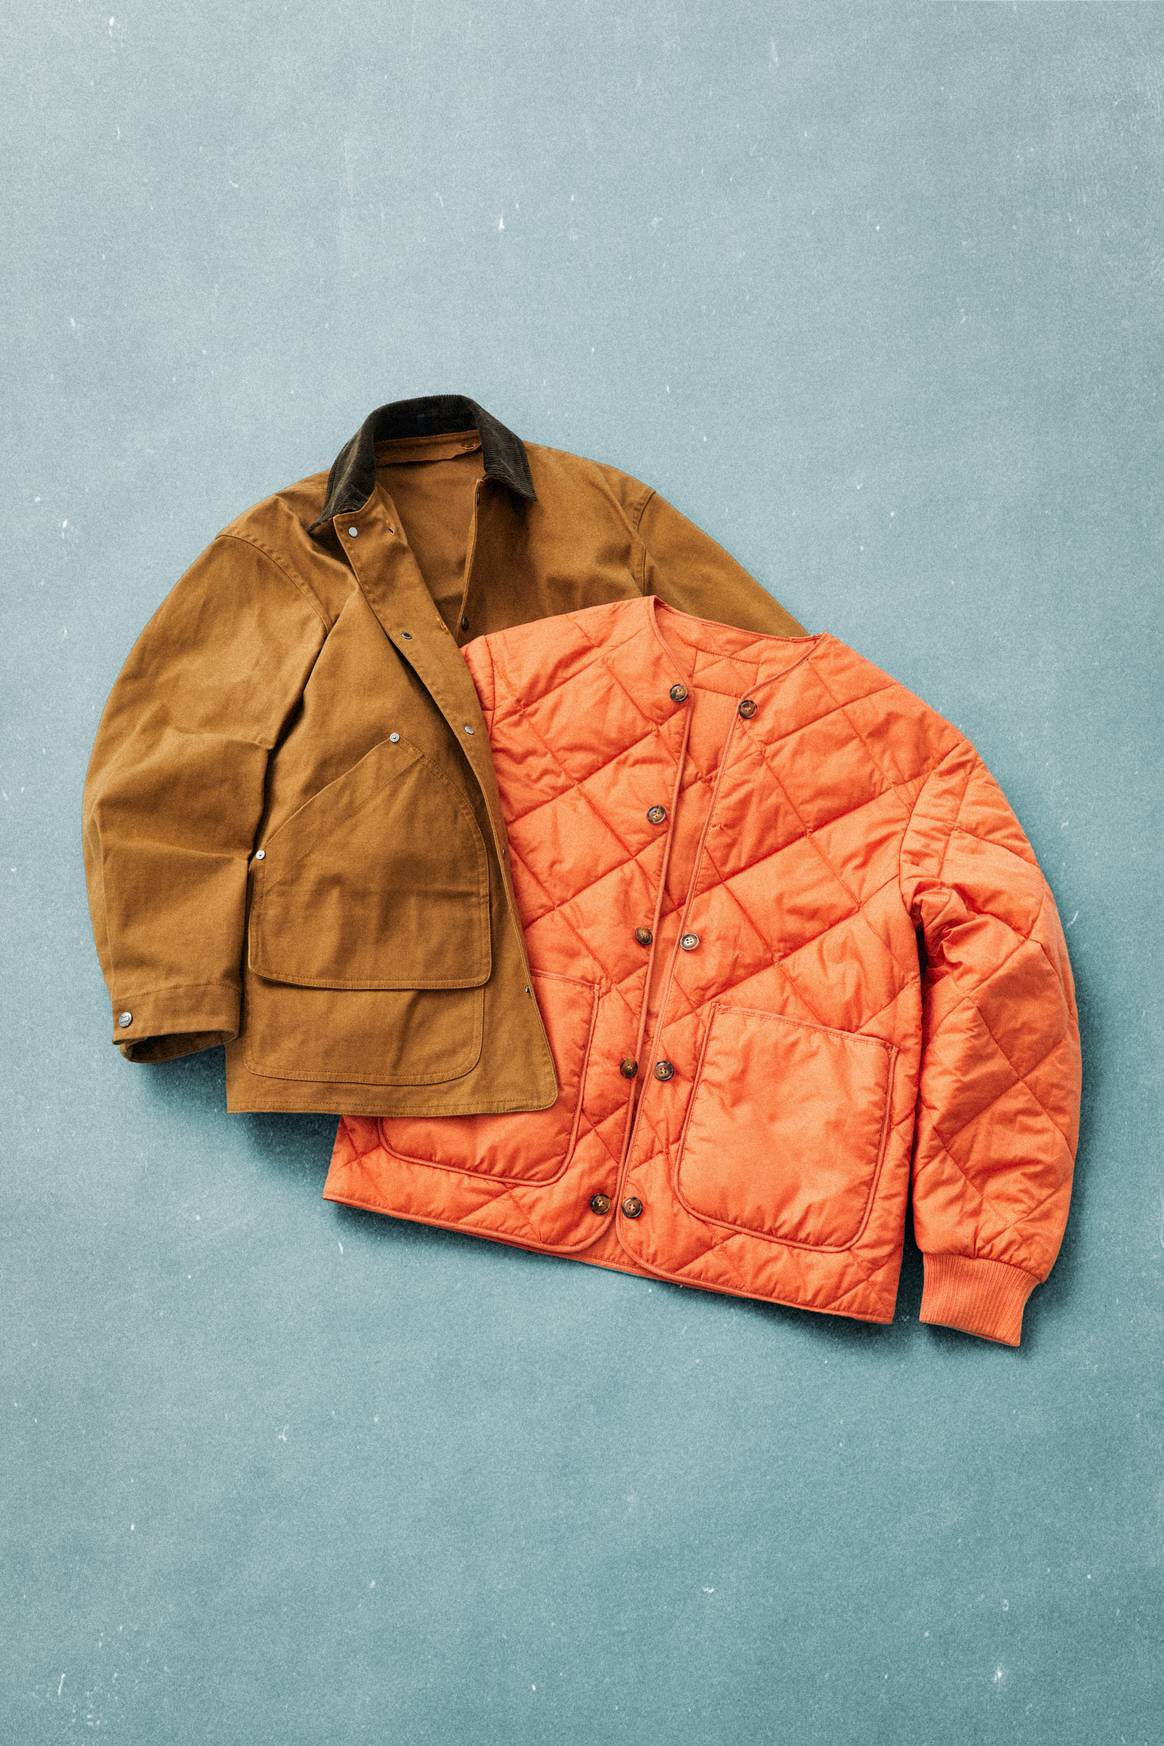 Woolrich Archive Collection